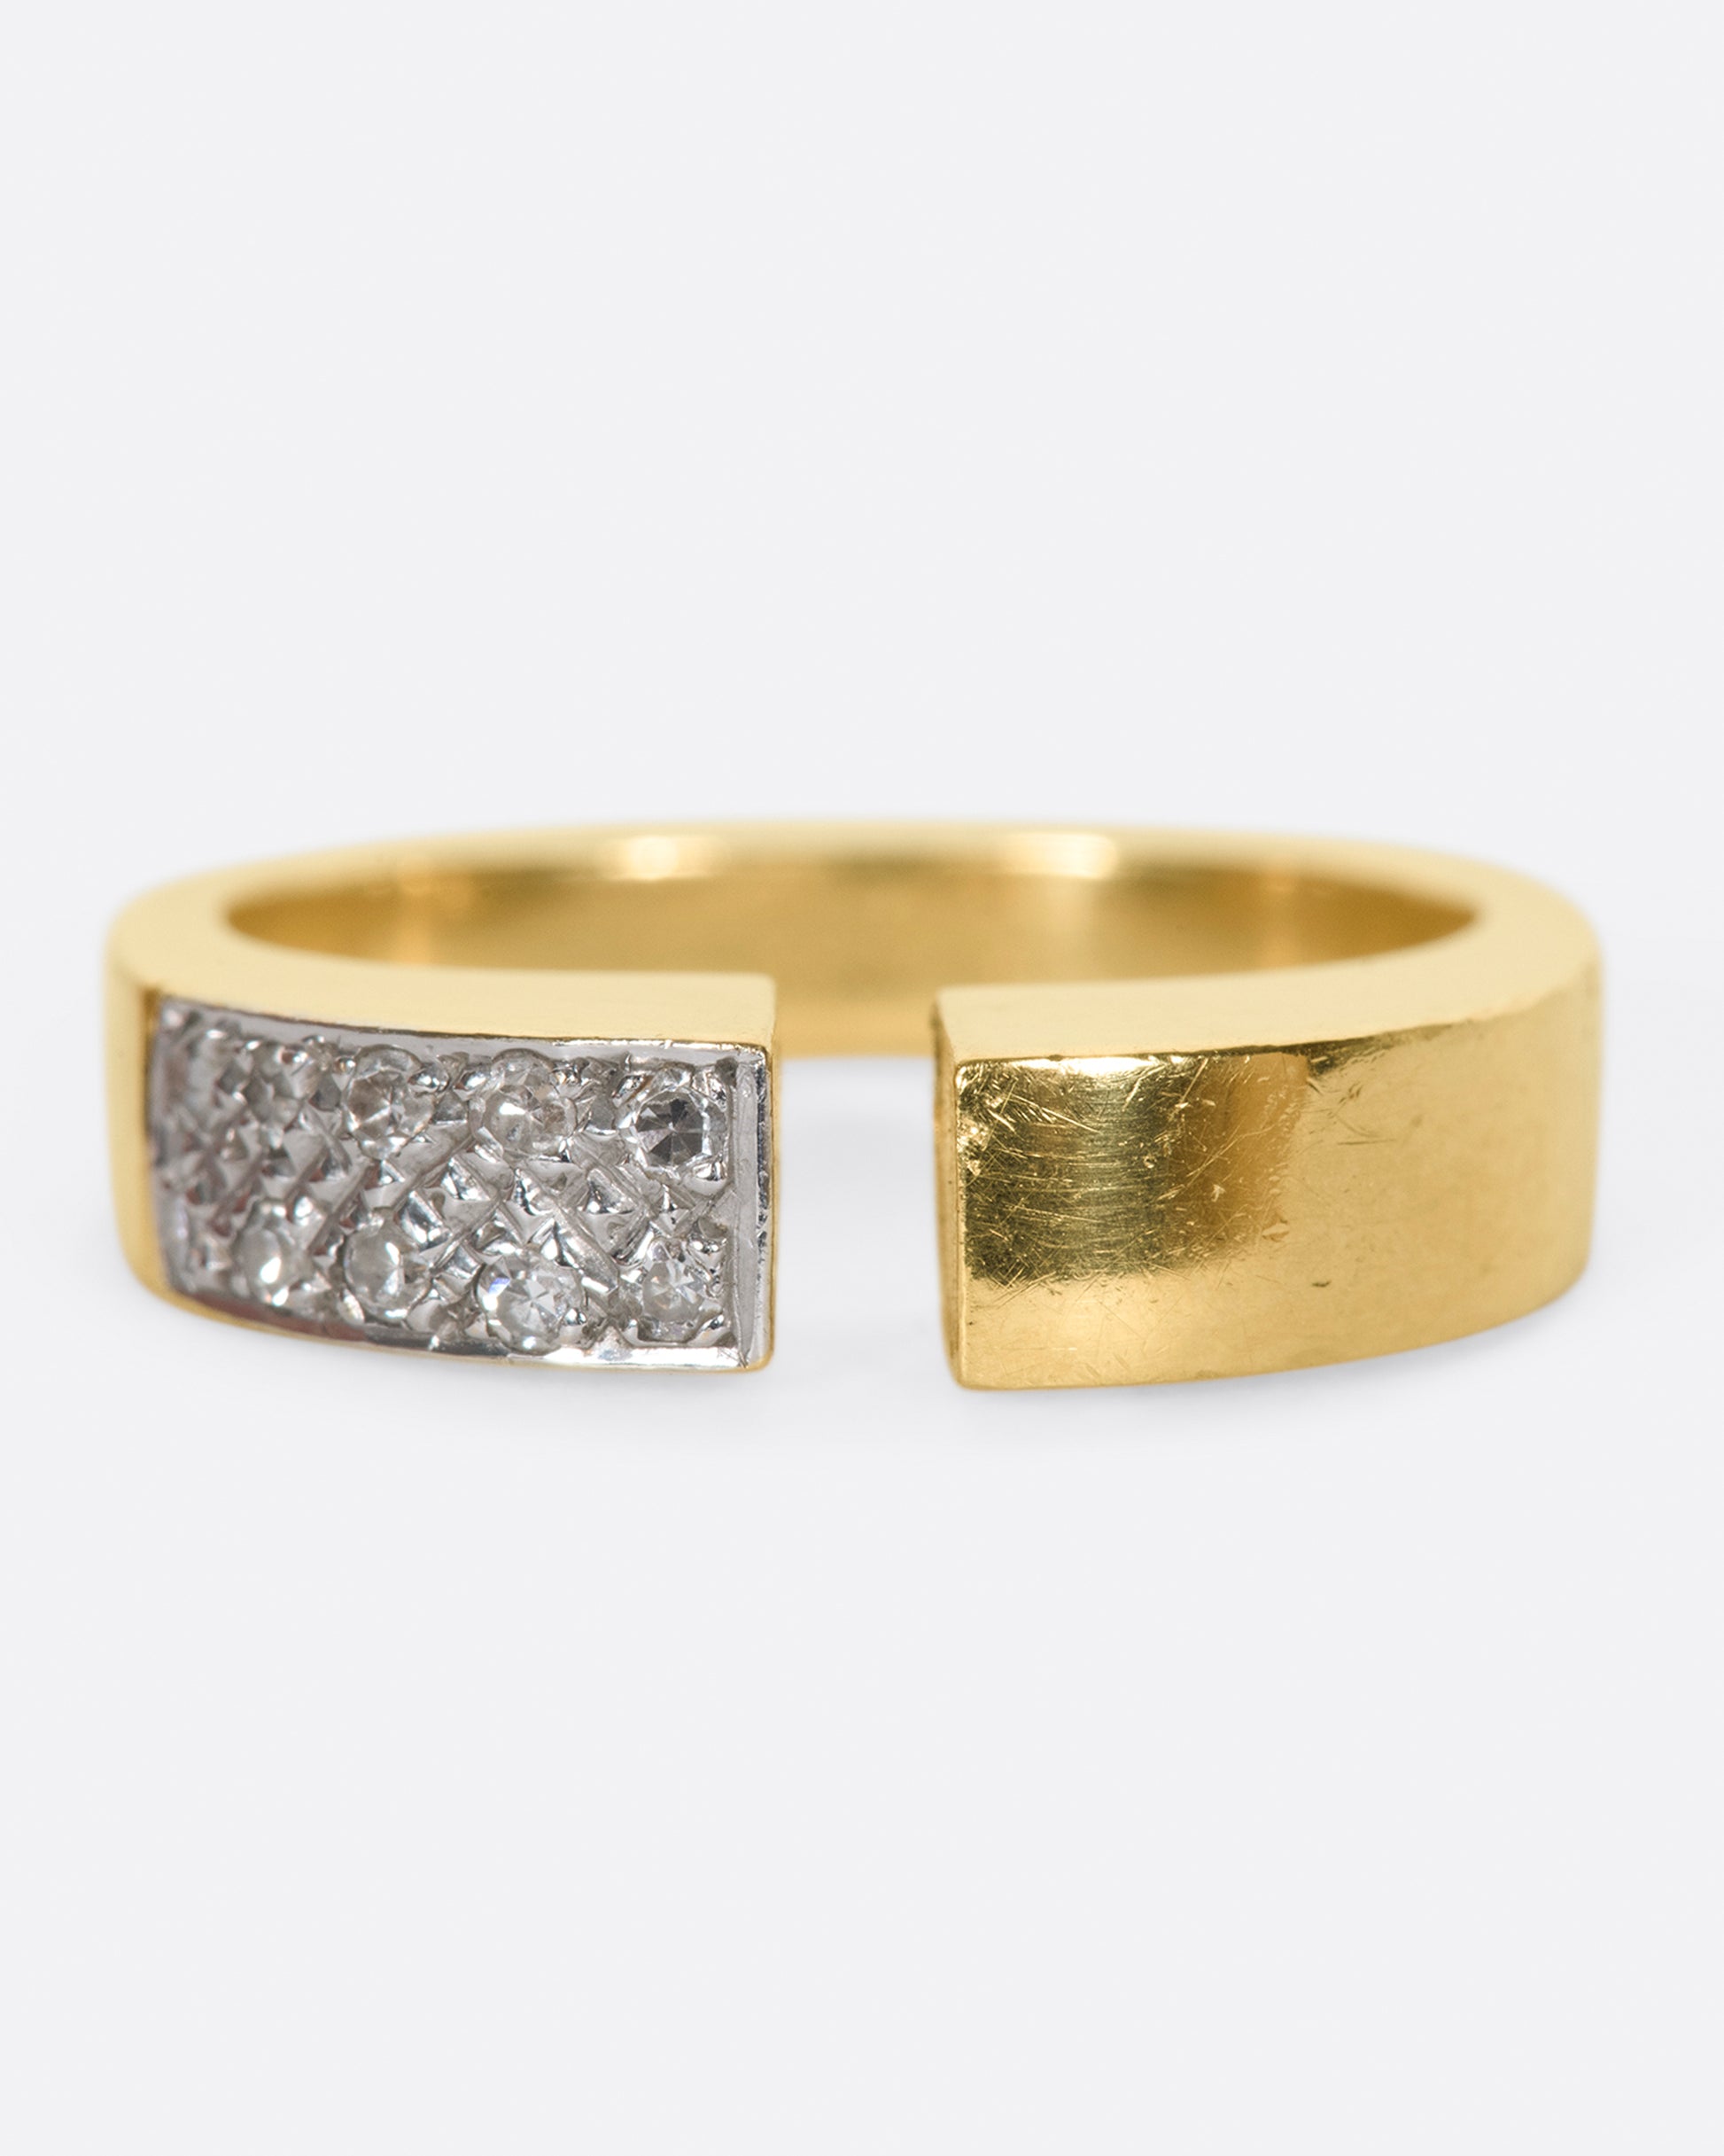 A raised, open, yellow gold ring with one pavé diamond corner.